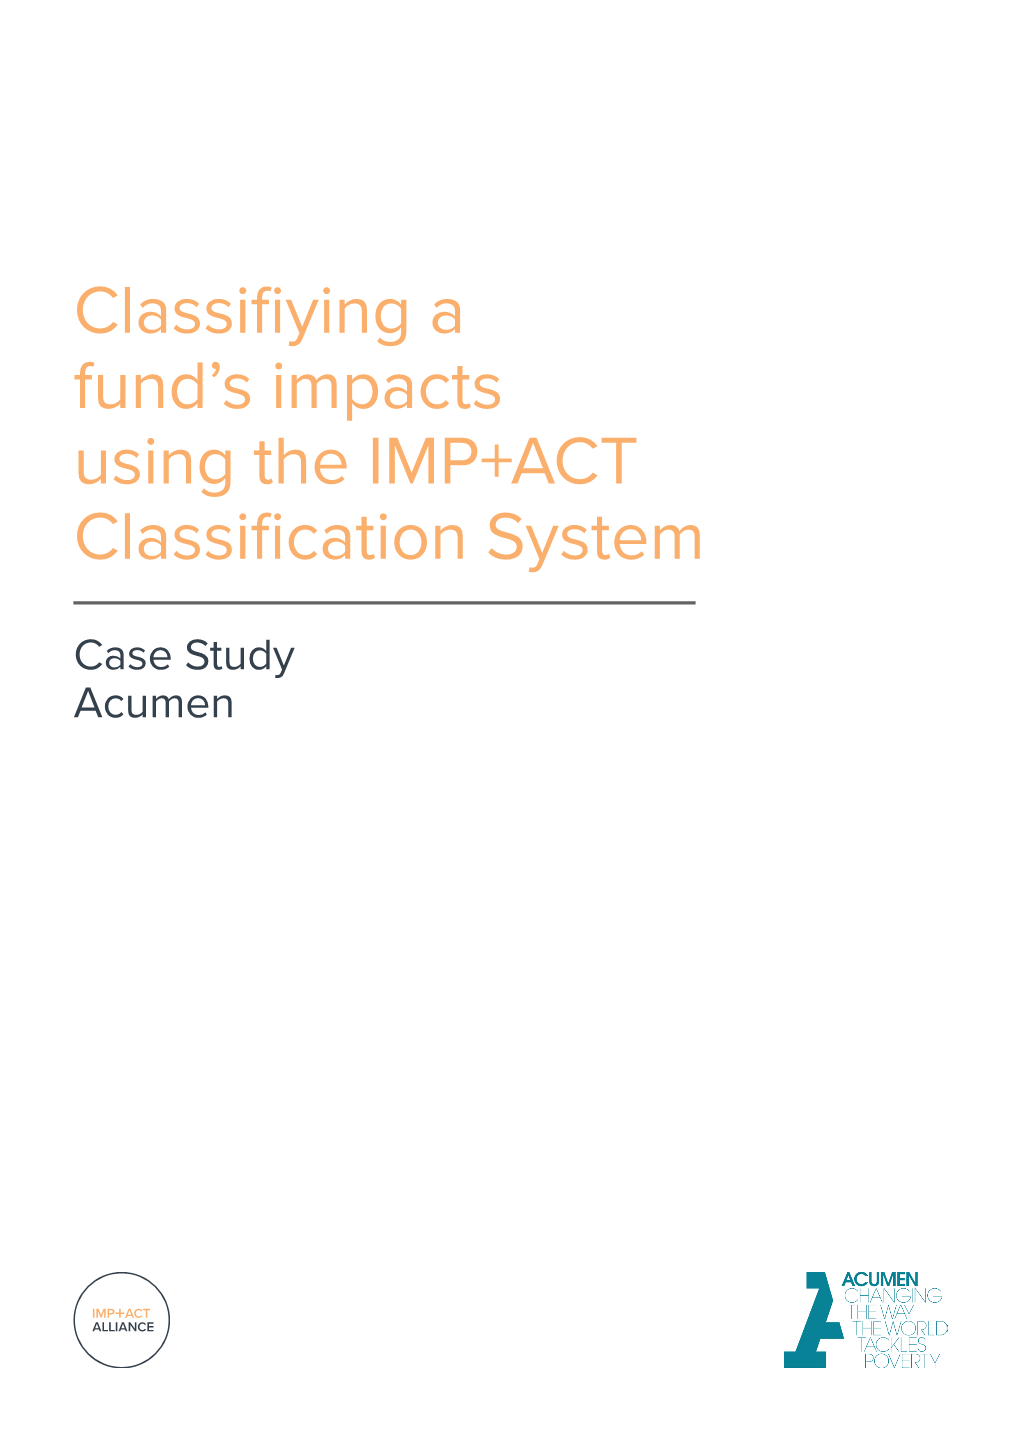 Classifiying a Fund's Impacts Using the IMP+ACT Classification System